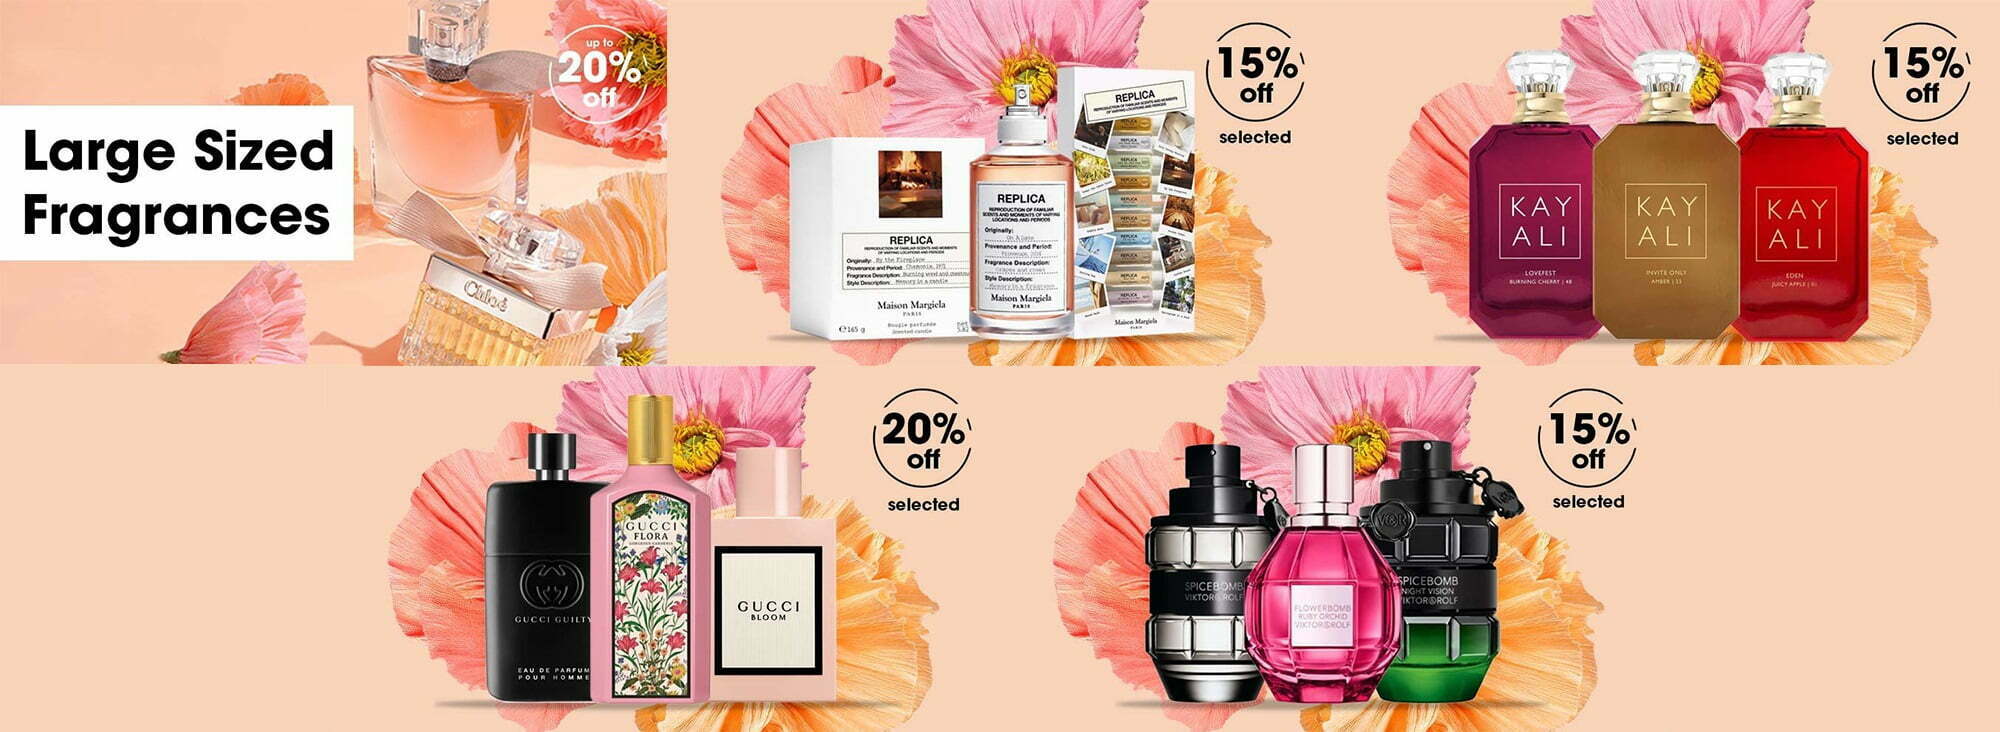 Offers at Sephora UK